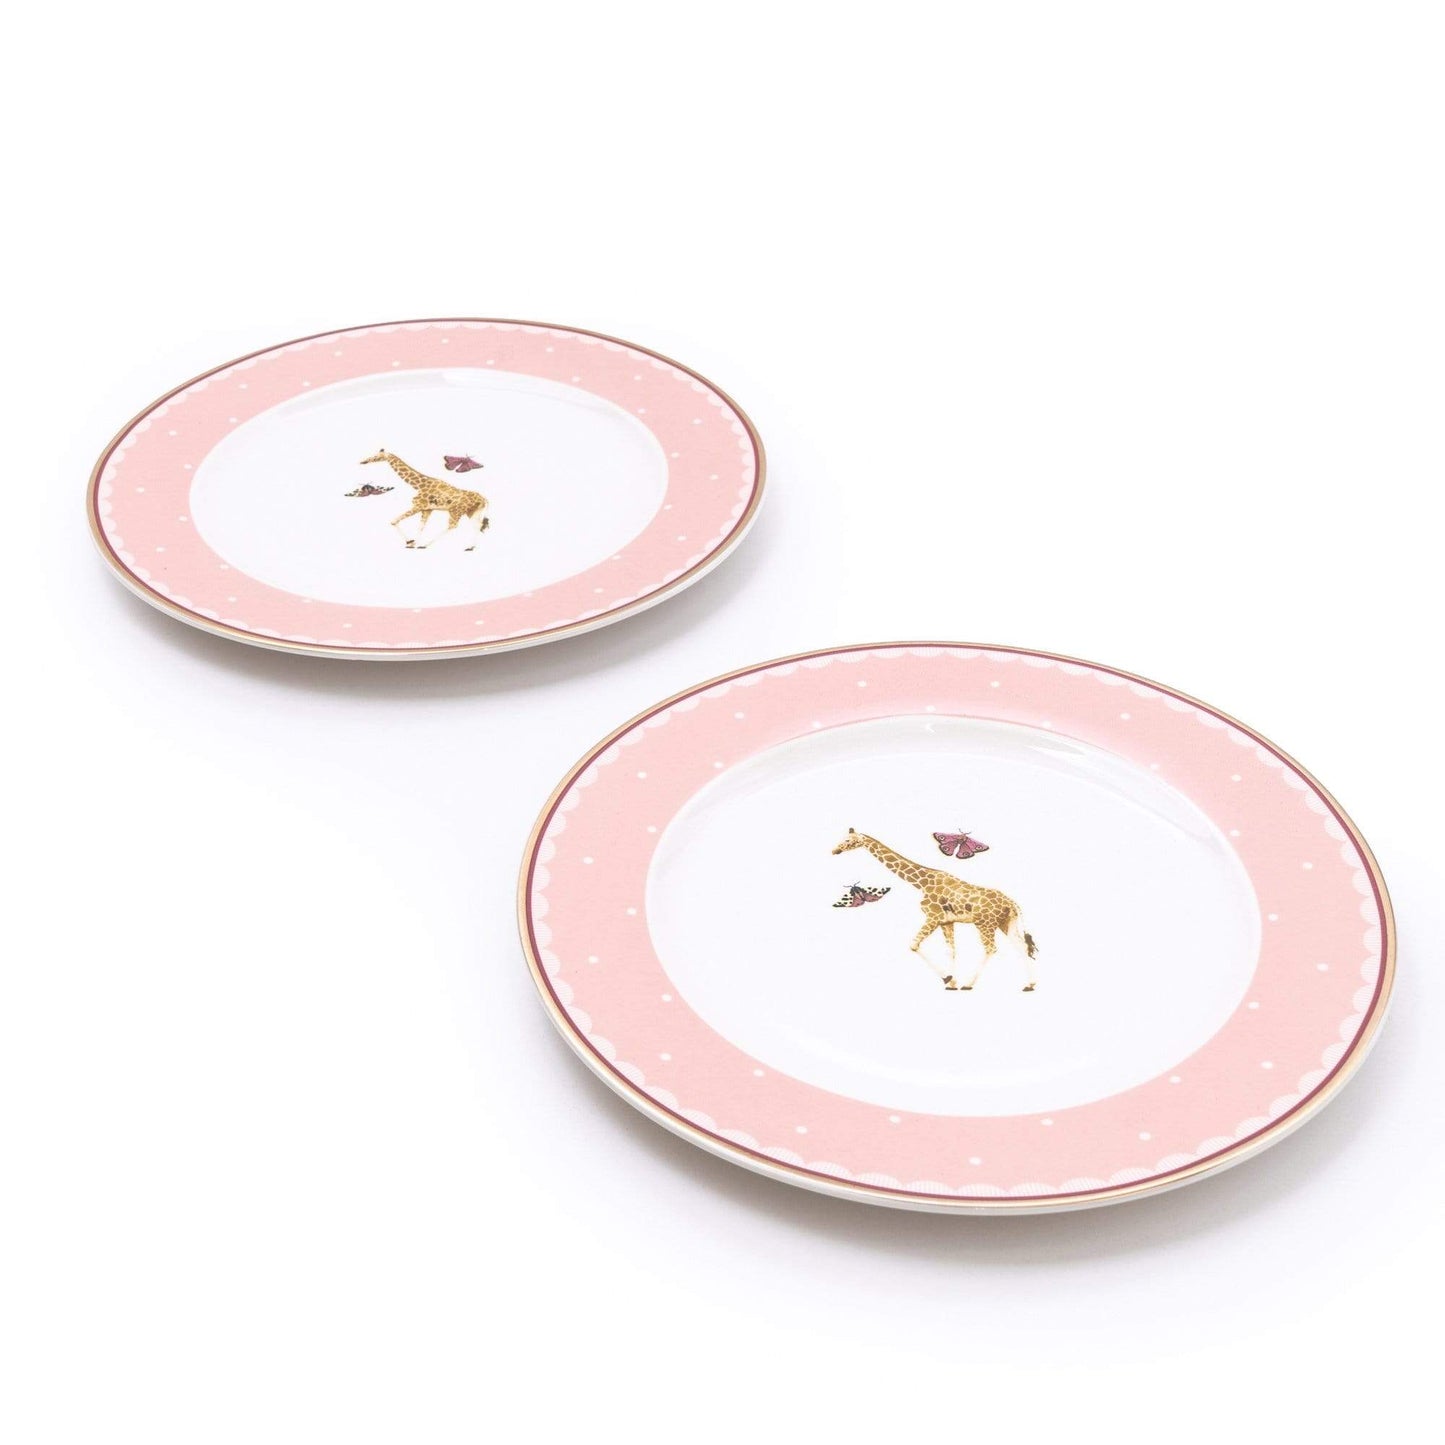 Giraffe Pink Side Plates with gift box, set of 2